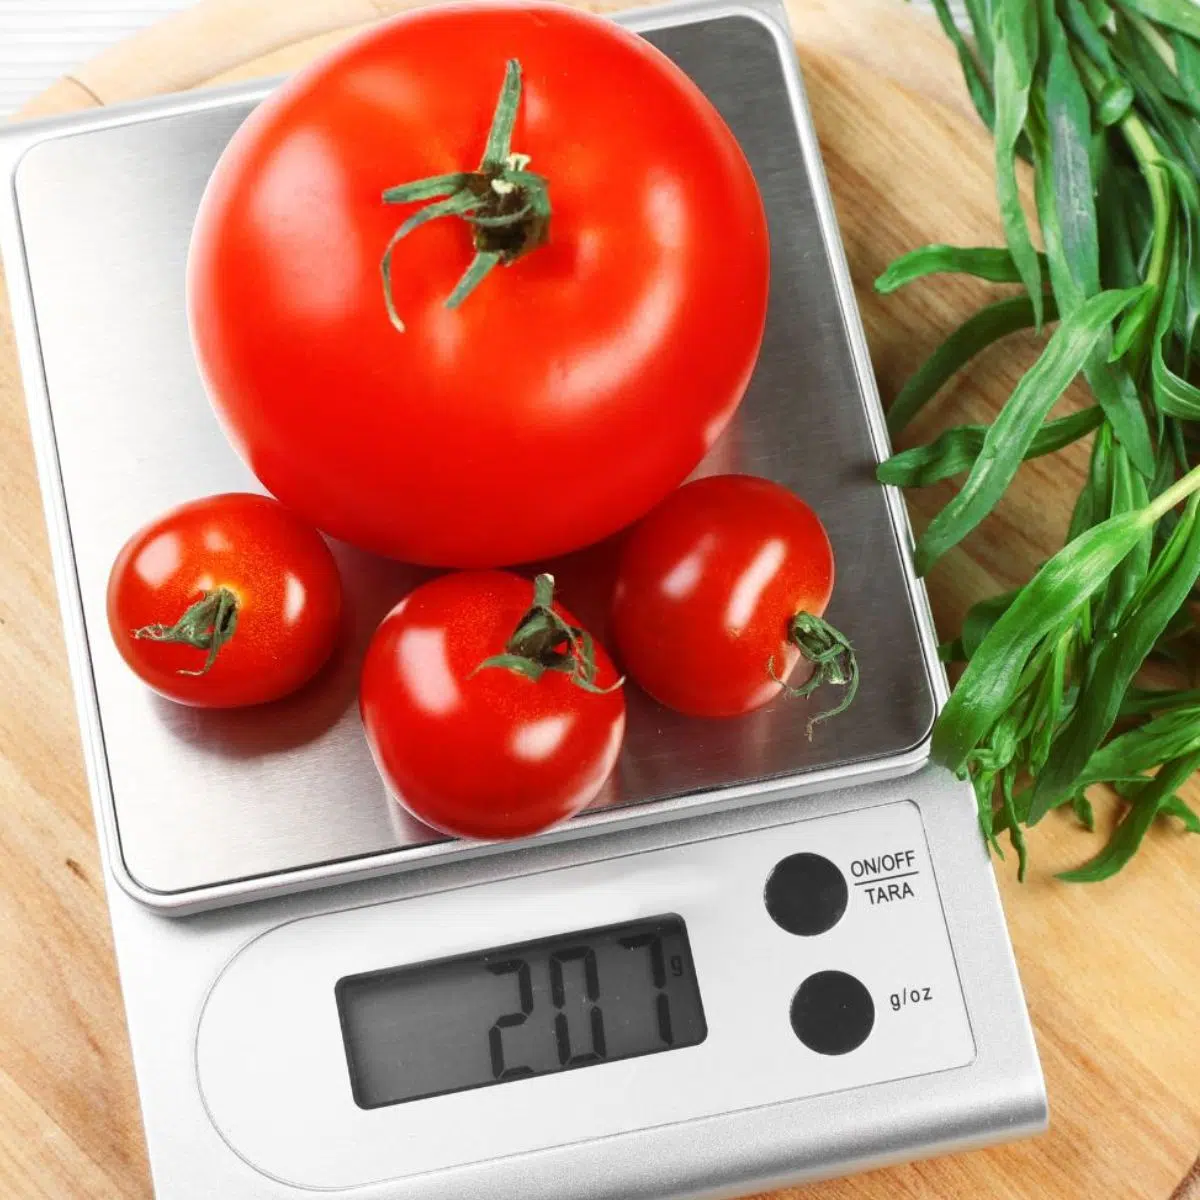 Grams in a pound conversion for cooking and baking illustrated with kitchen scale and fresh tomatoes weighed in grams.